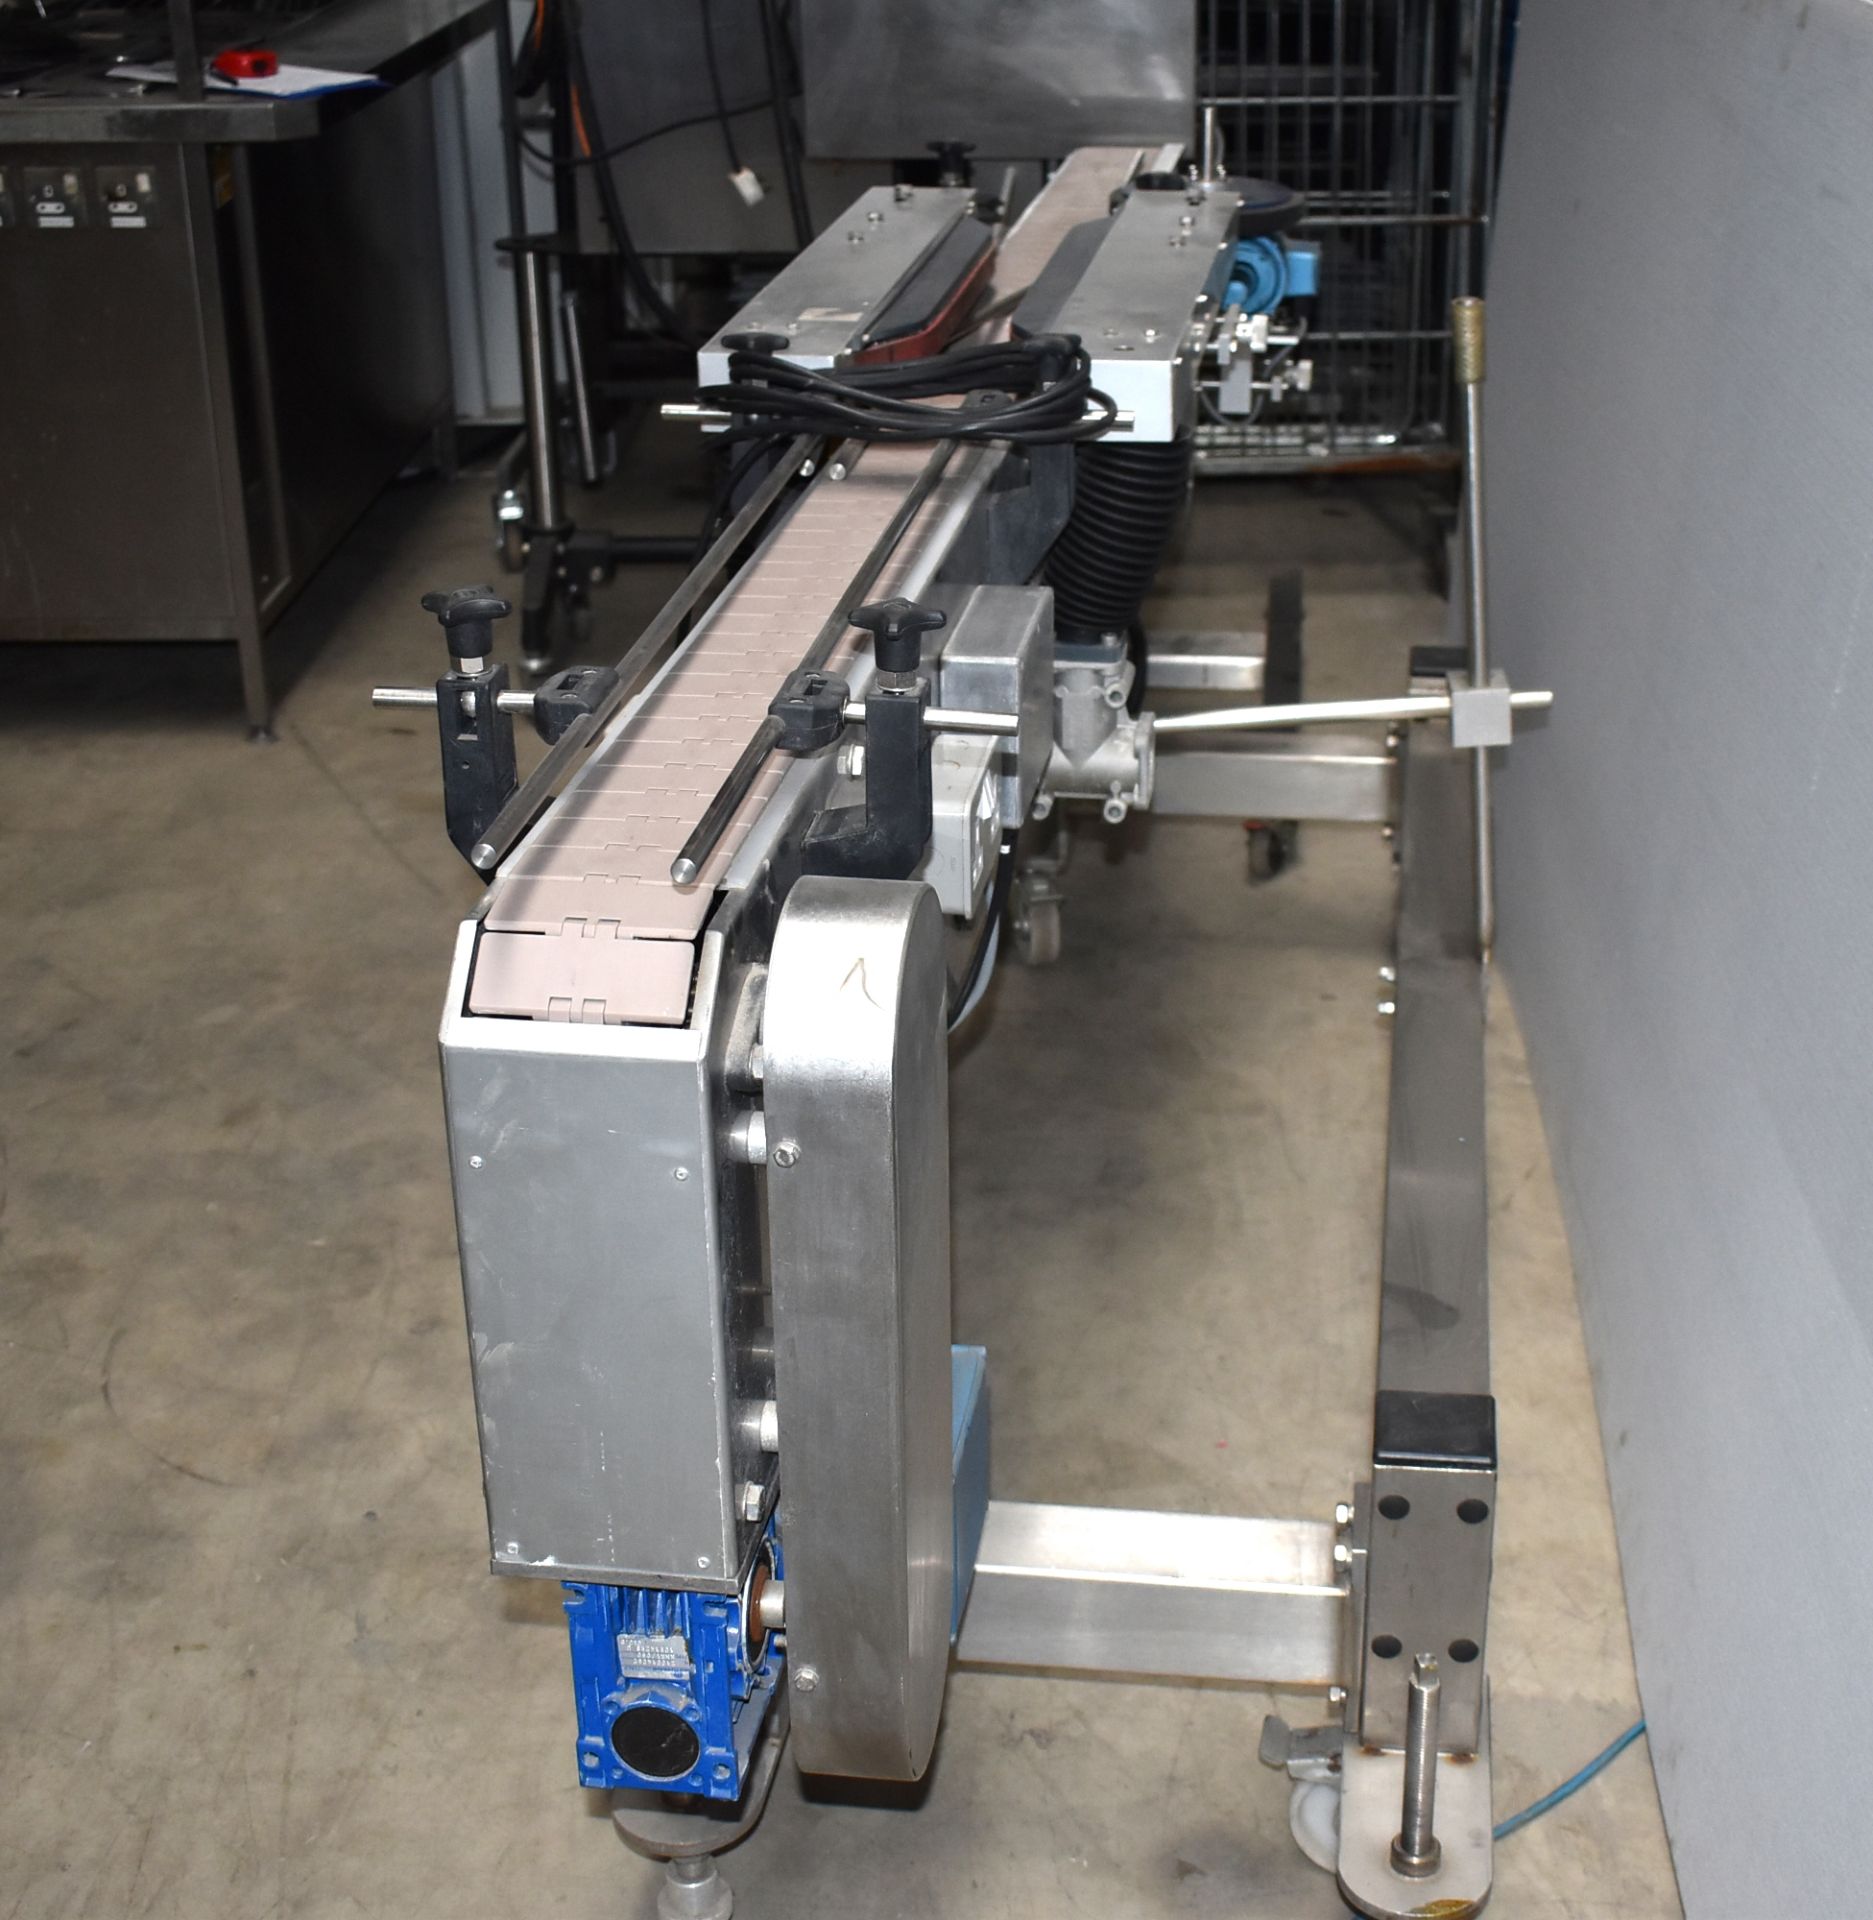 1 x Precision Labelling Systems Conveyor - Part Number 20745 - Approx Size: H100 x W250 cms - - Image 16 of 25